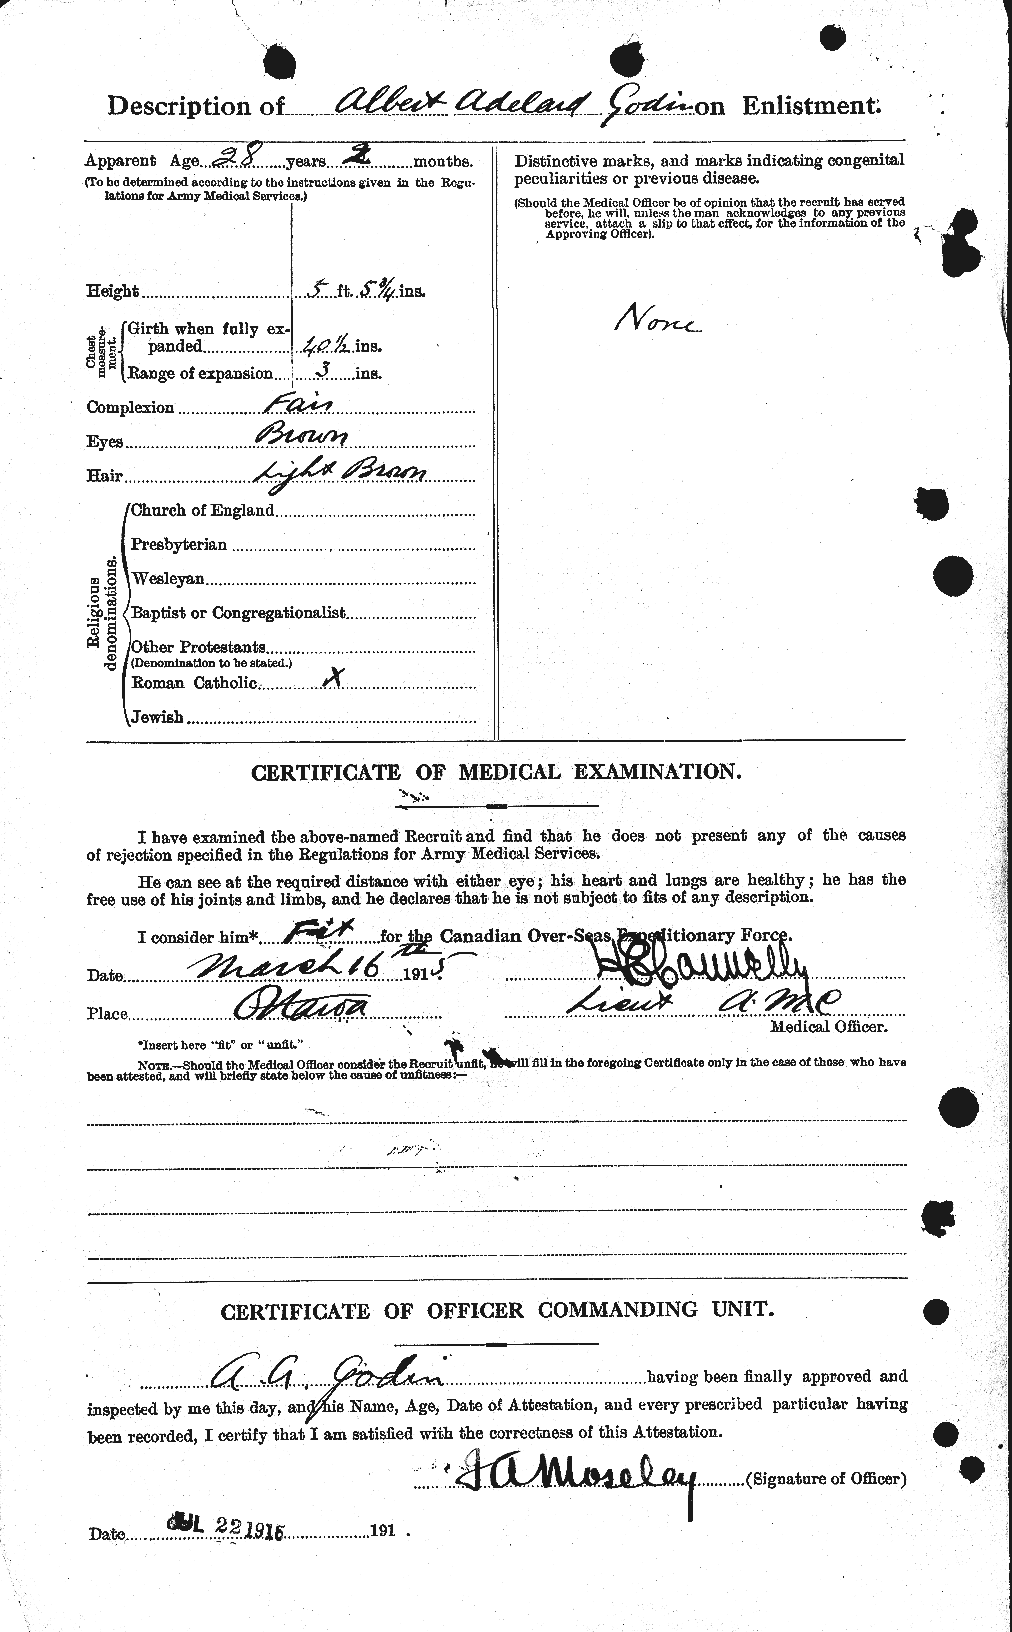 Personnel Records of the First World War - CEF 354483b